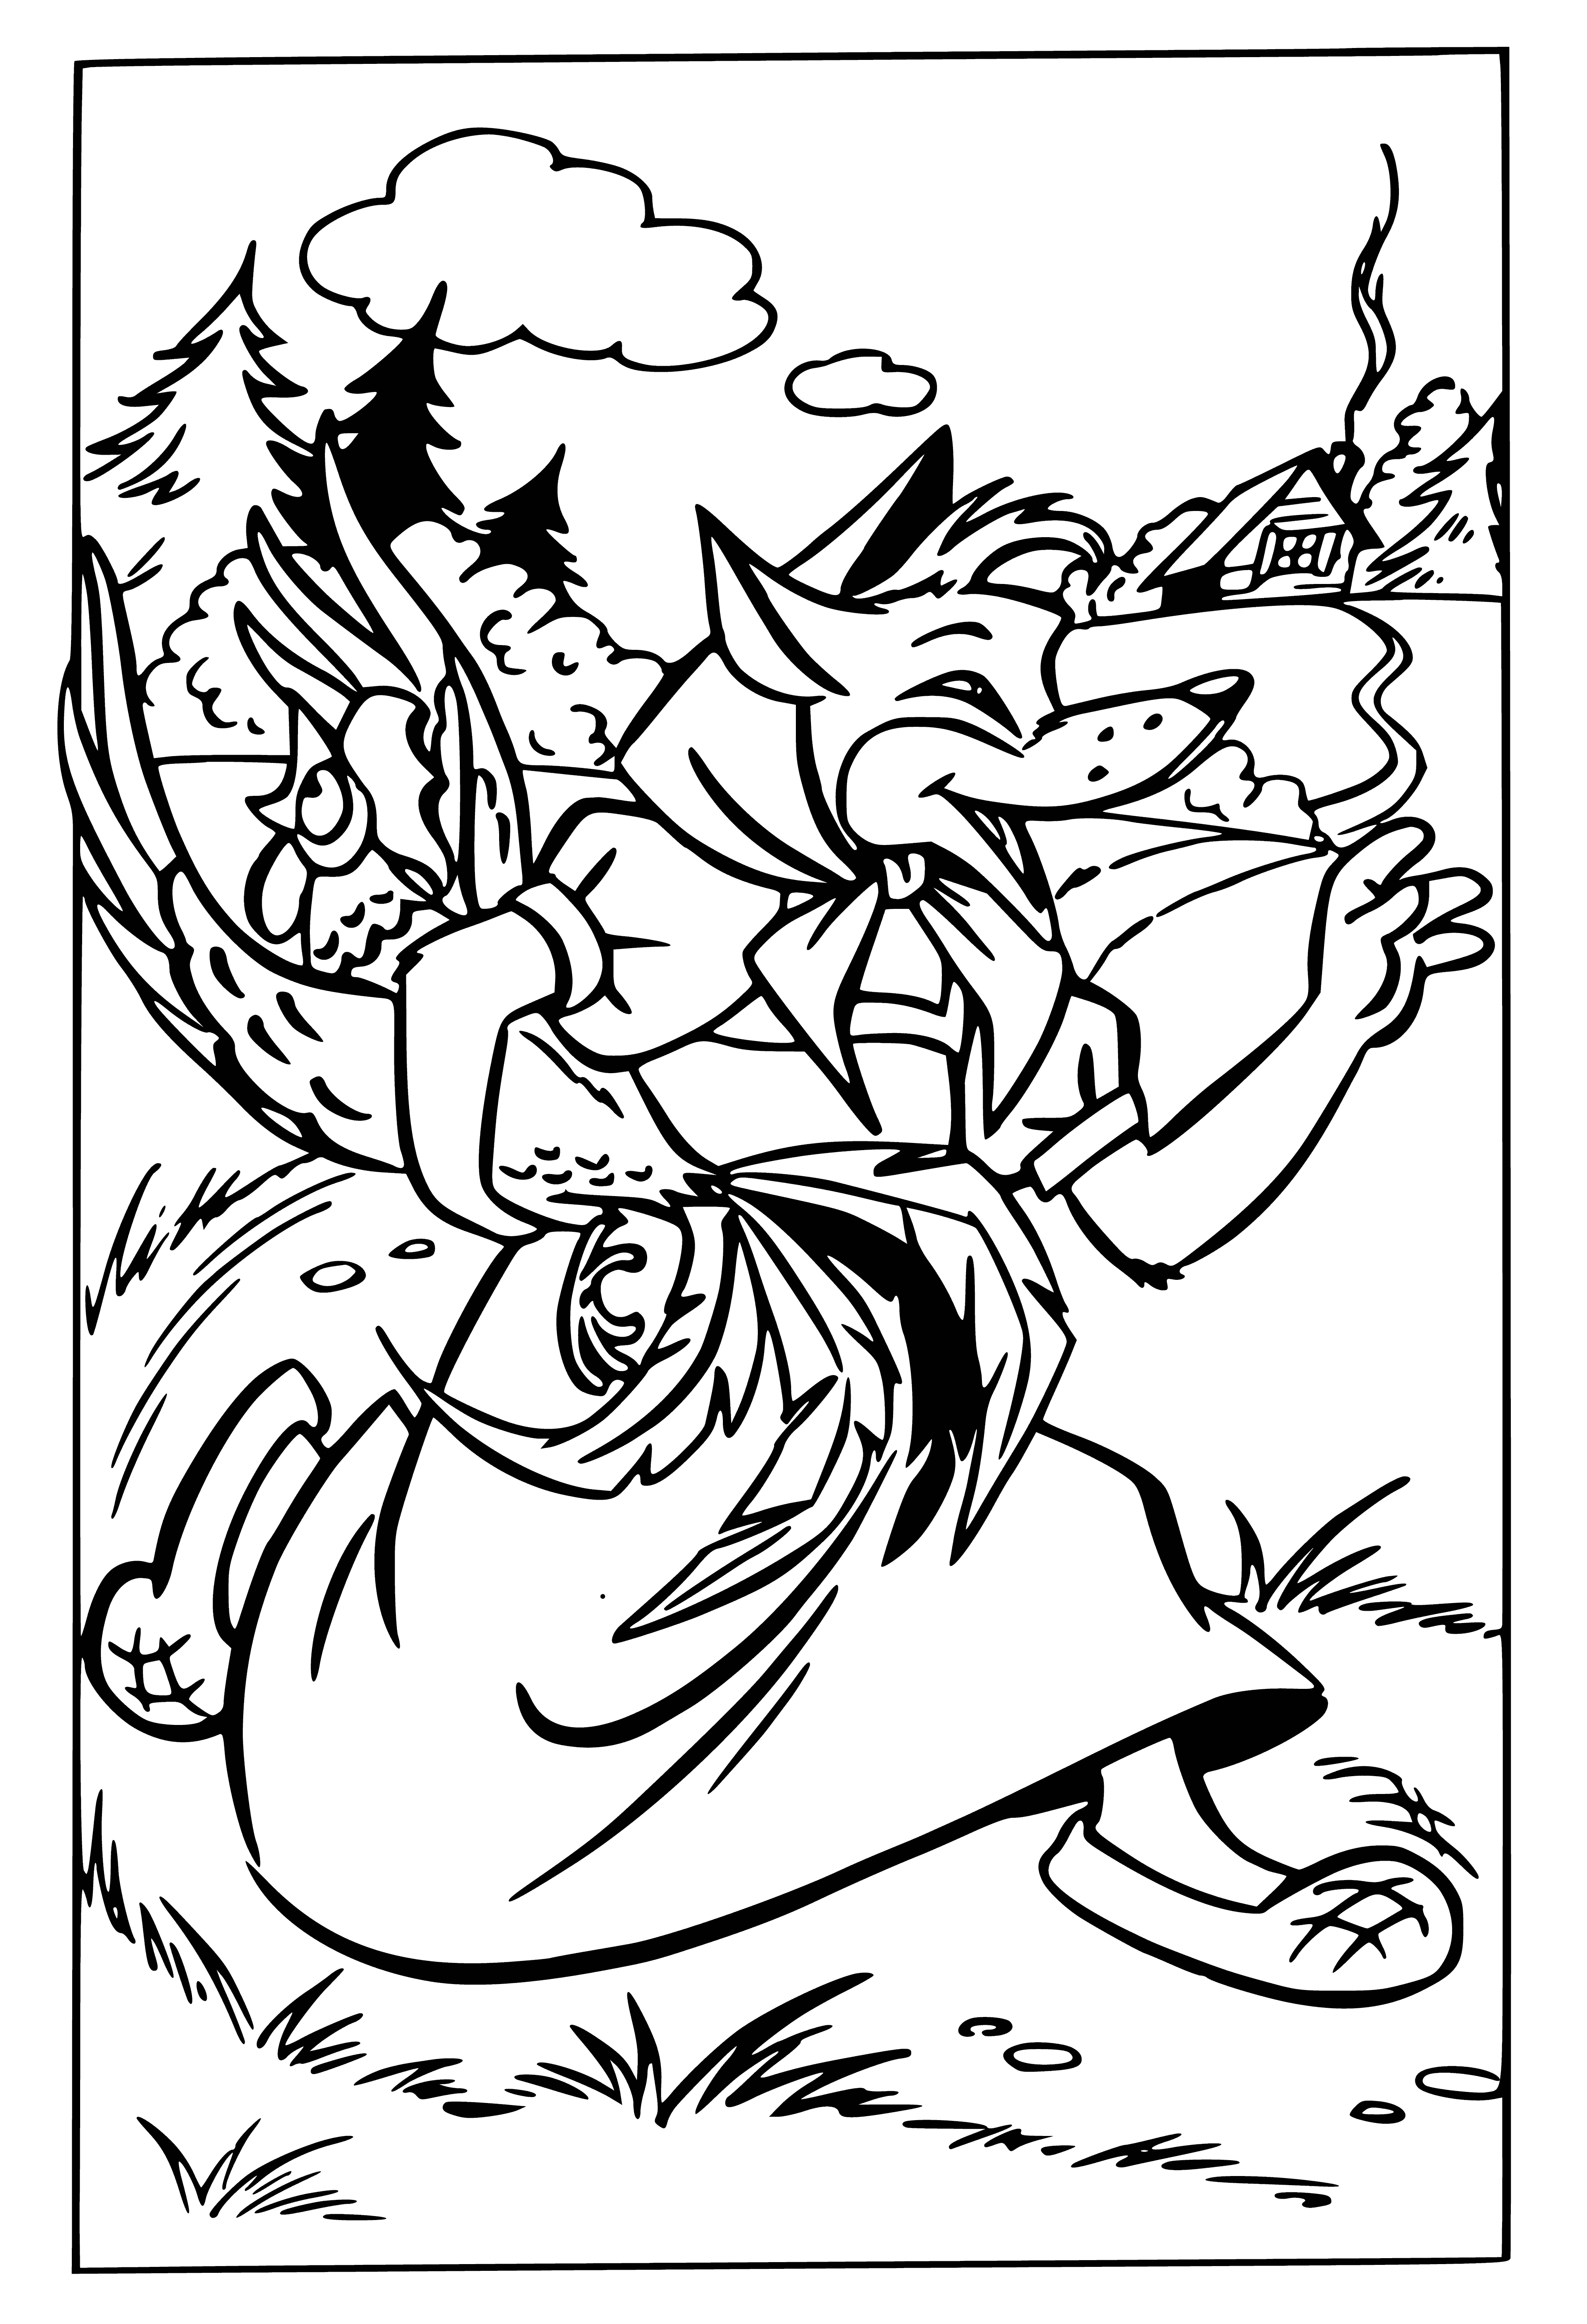 coloring page: Fox carrying cockerel walking away from a farmhouse w/ trees in background; perfect coloring page for kids! #coloringbook